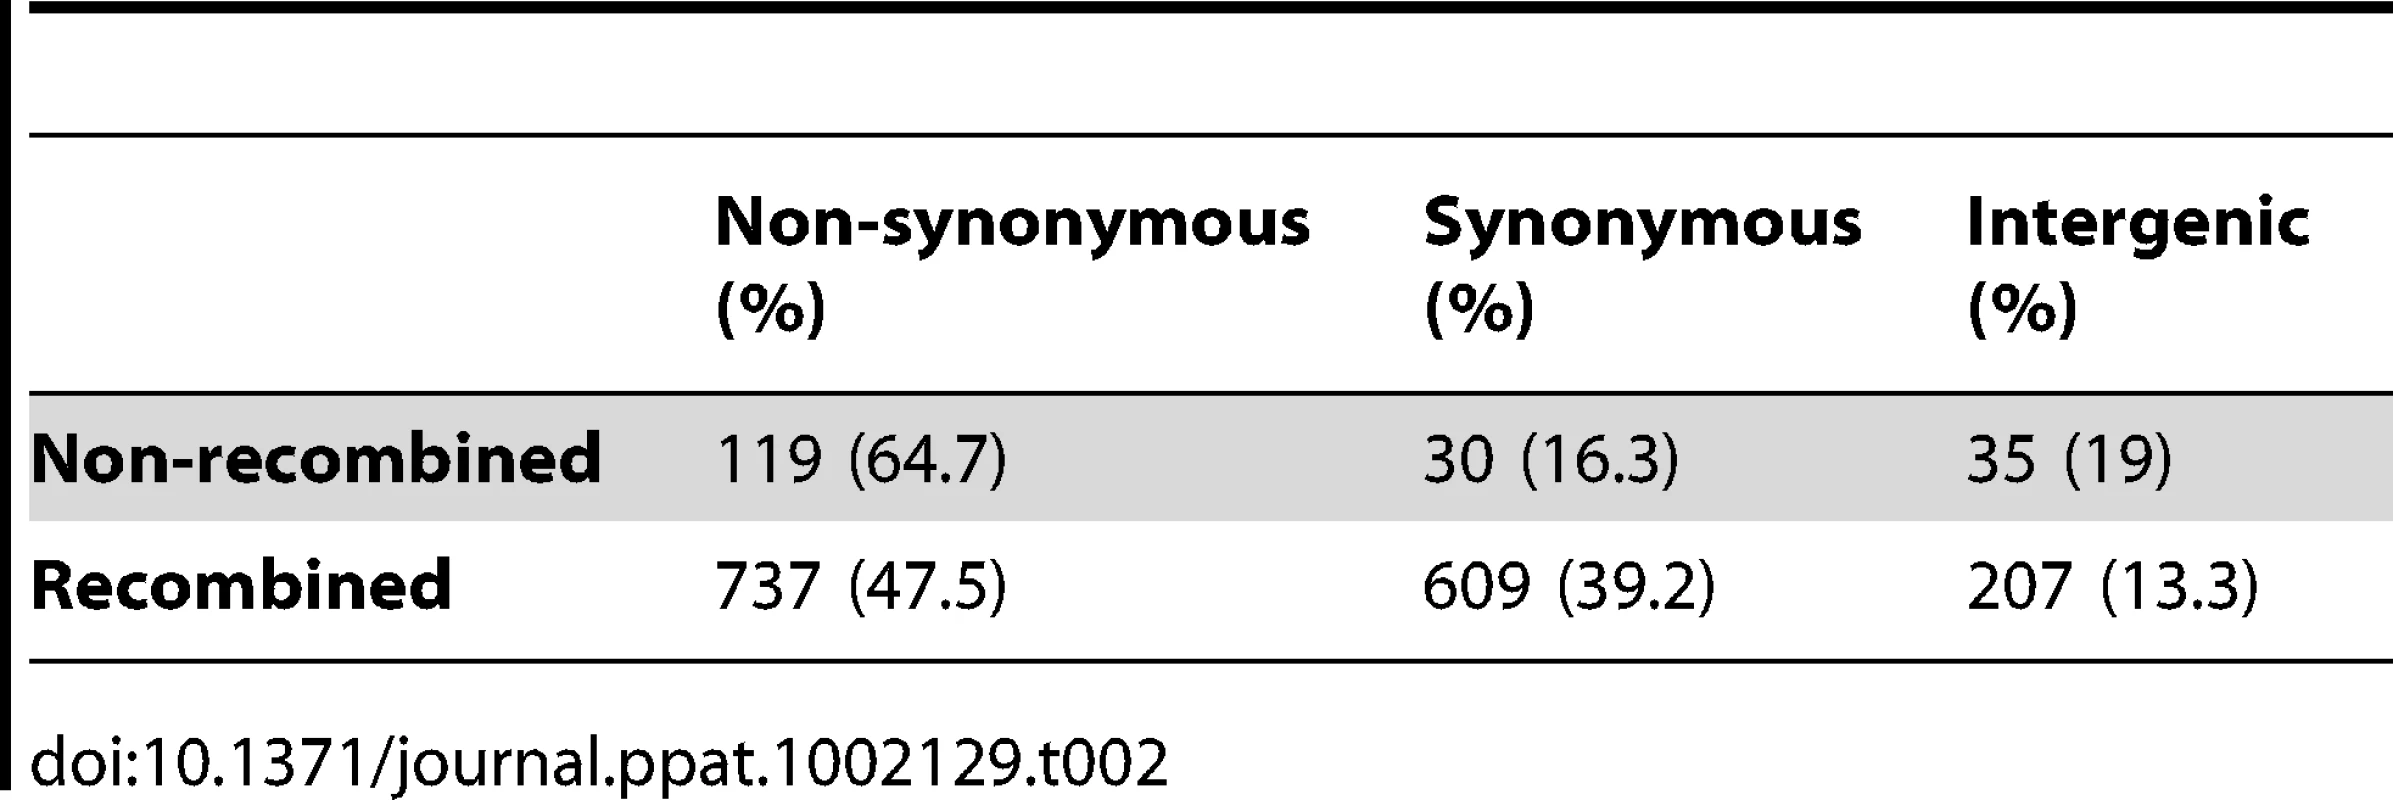 Number of non-synonymous, synonymous, and intergenic SNPs for recombined and non-recombined regions in a hypevirulent clone of &lt;i&gt;C. difficile&lt;/i&gt;.